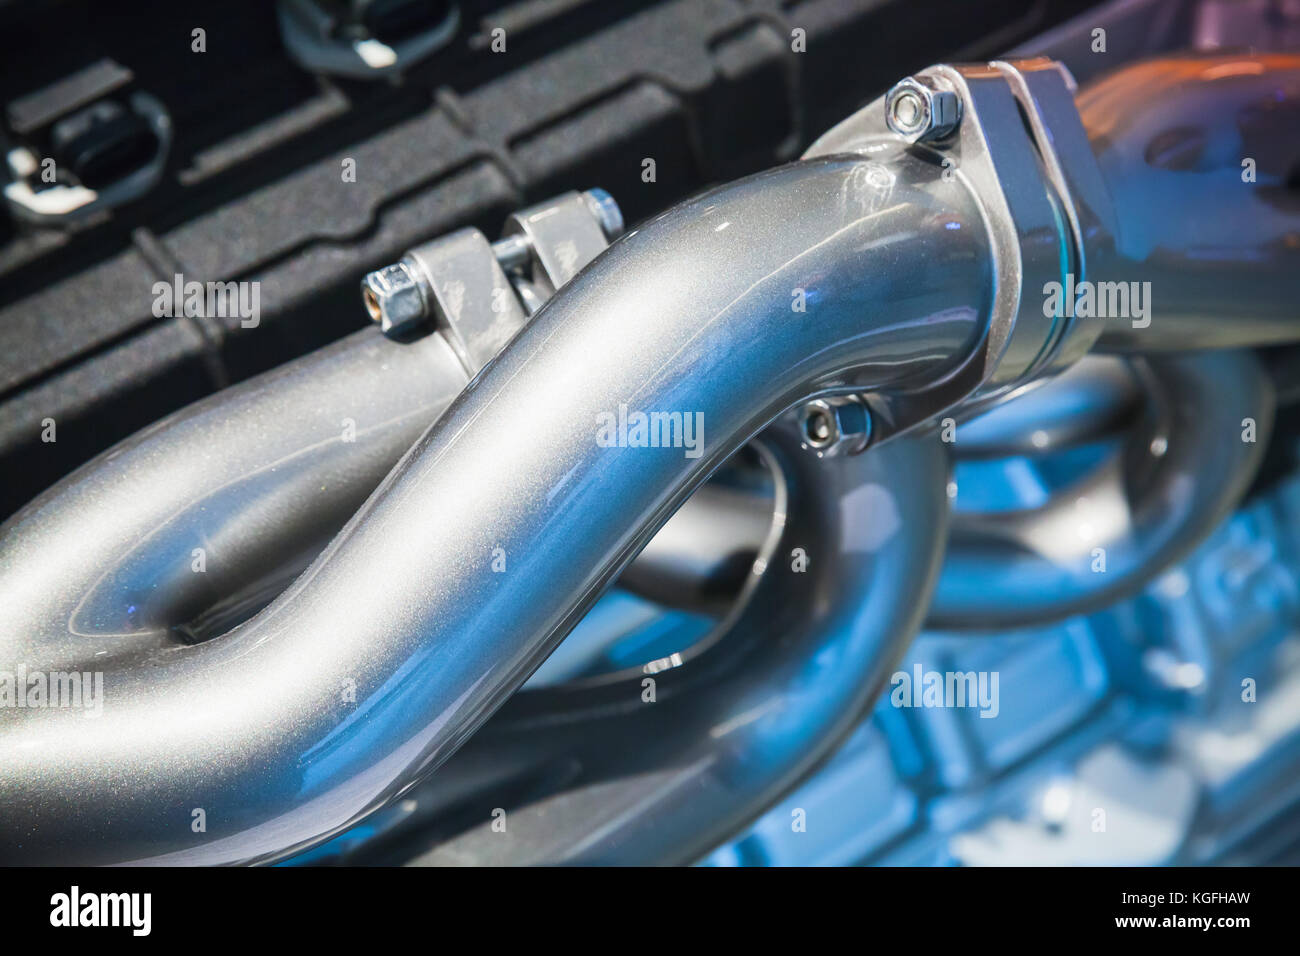 Air blowing tubes. Shiny motor parts, automotive V12 engine fragment, closeup photo with selective focus Stock Photo